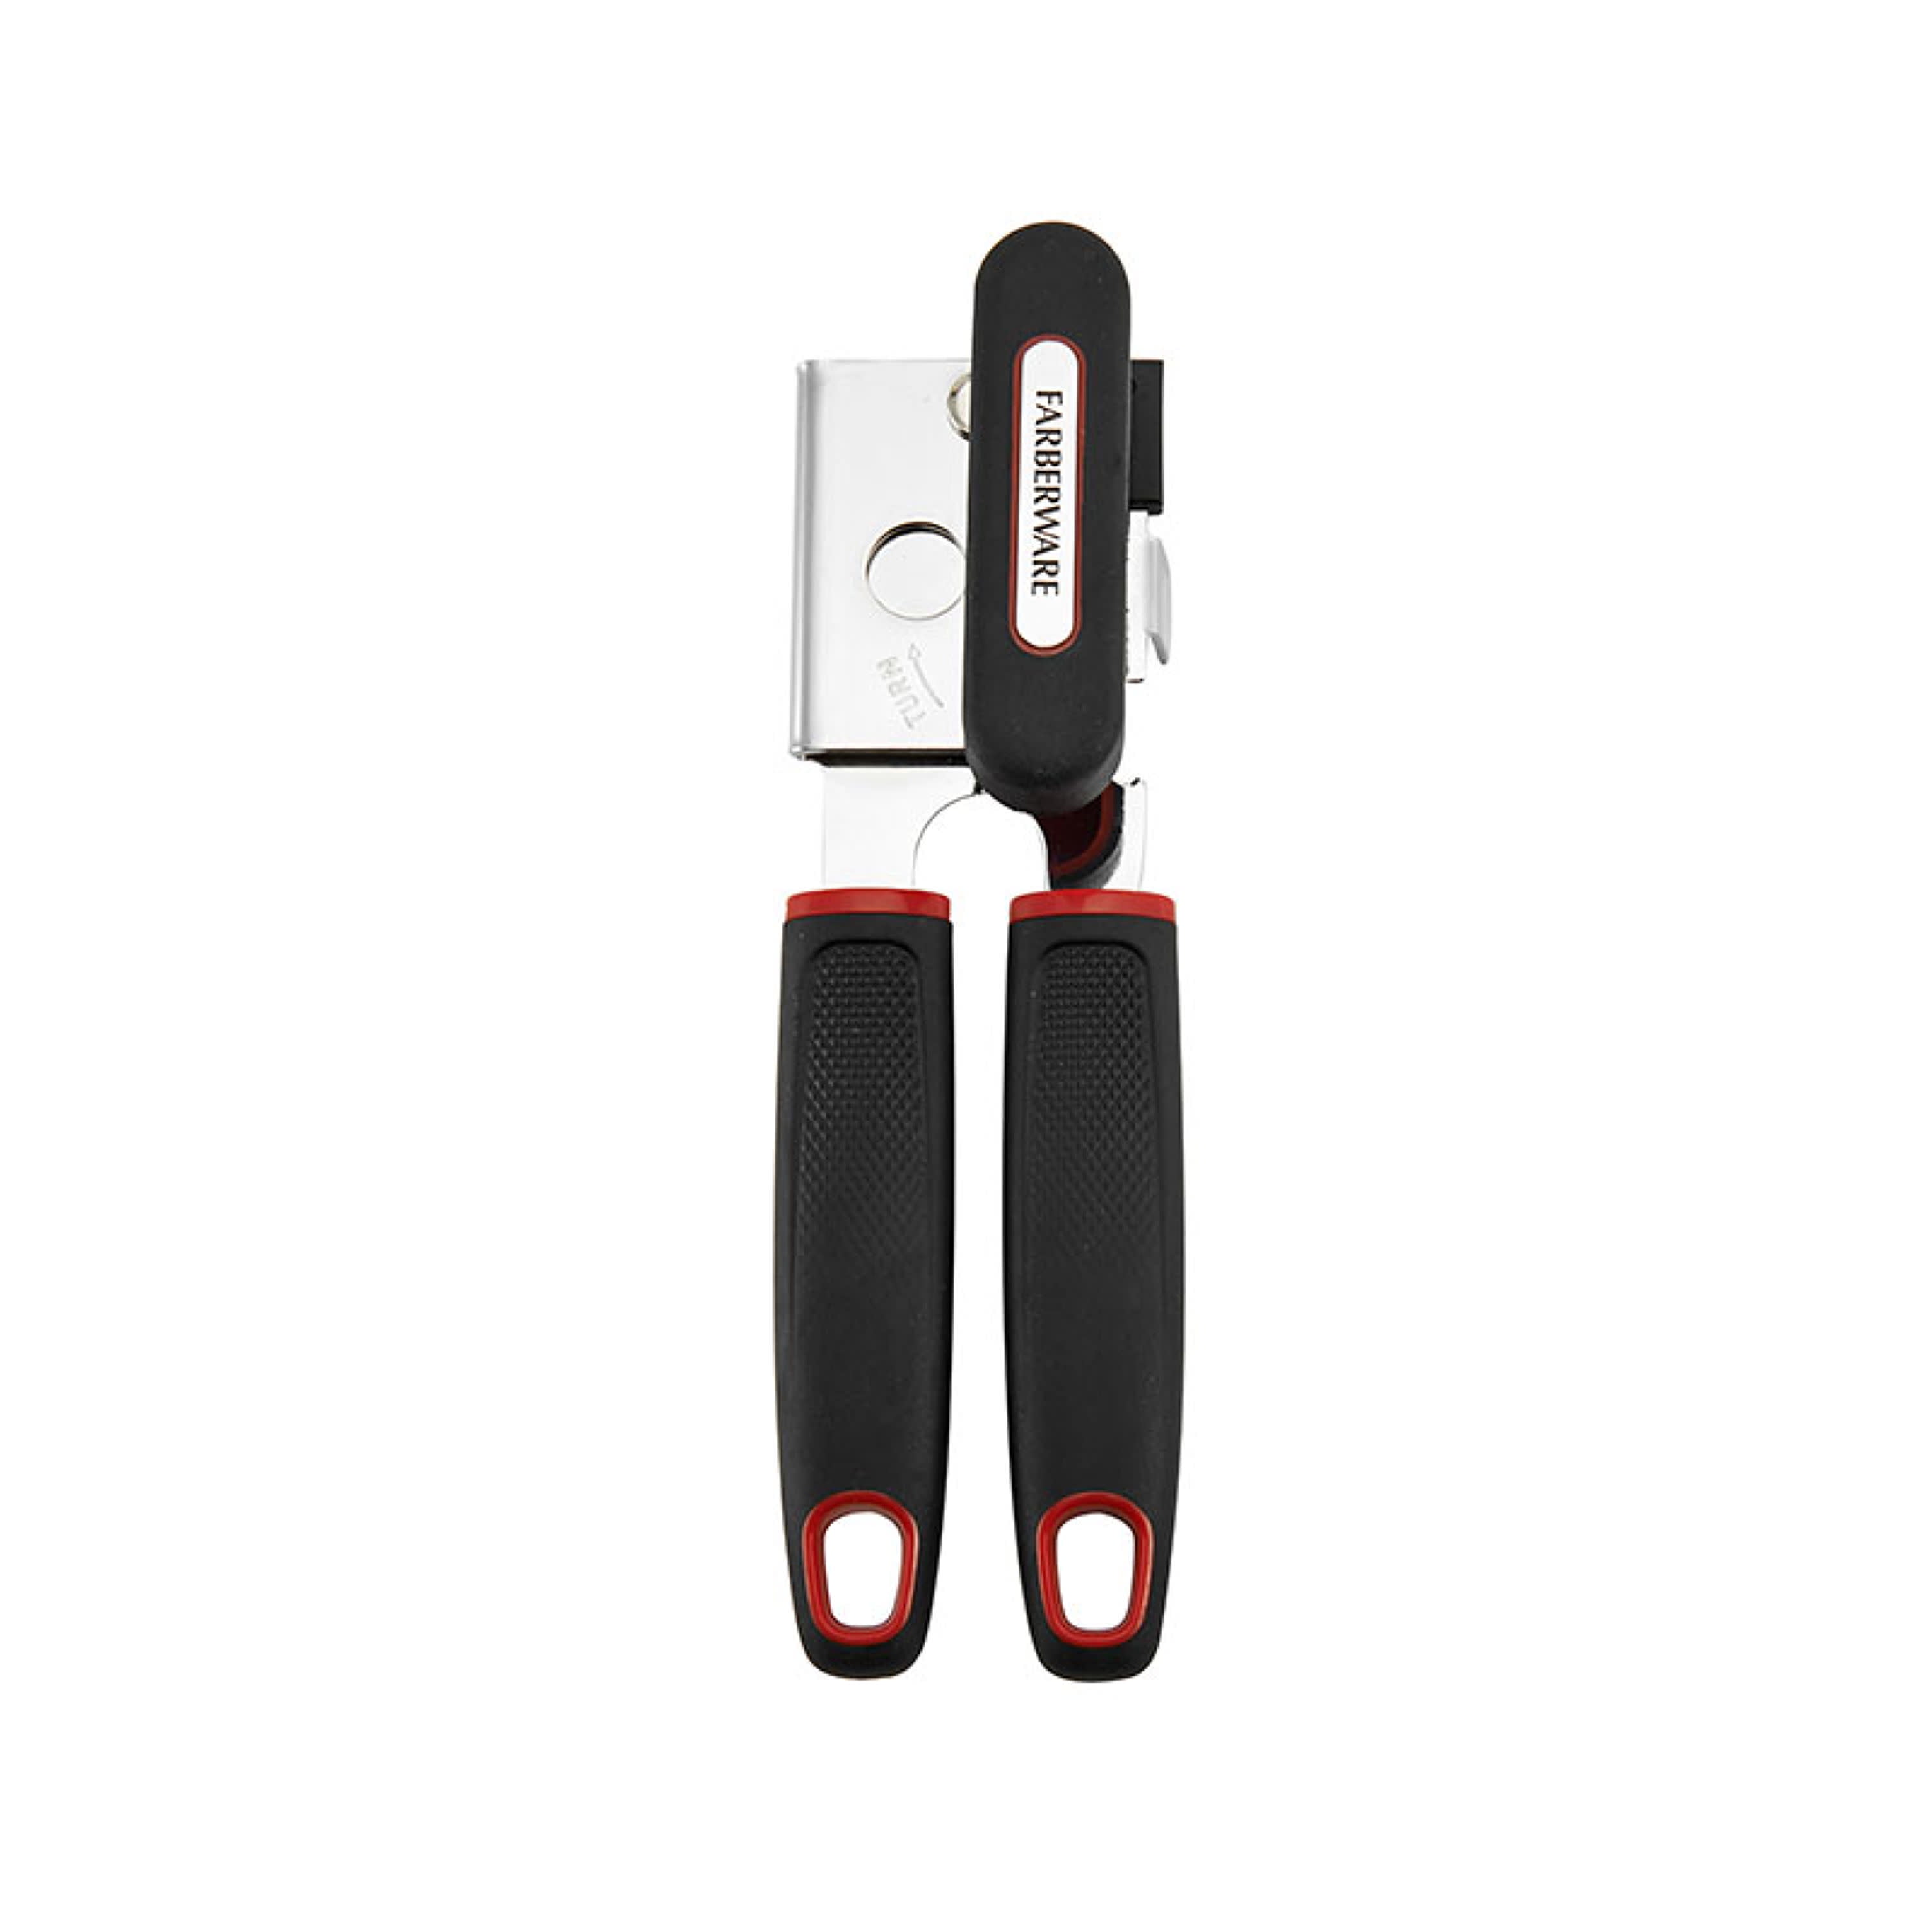 Farberware Soft Grips Safety Can Opener in Black with Red Accents